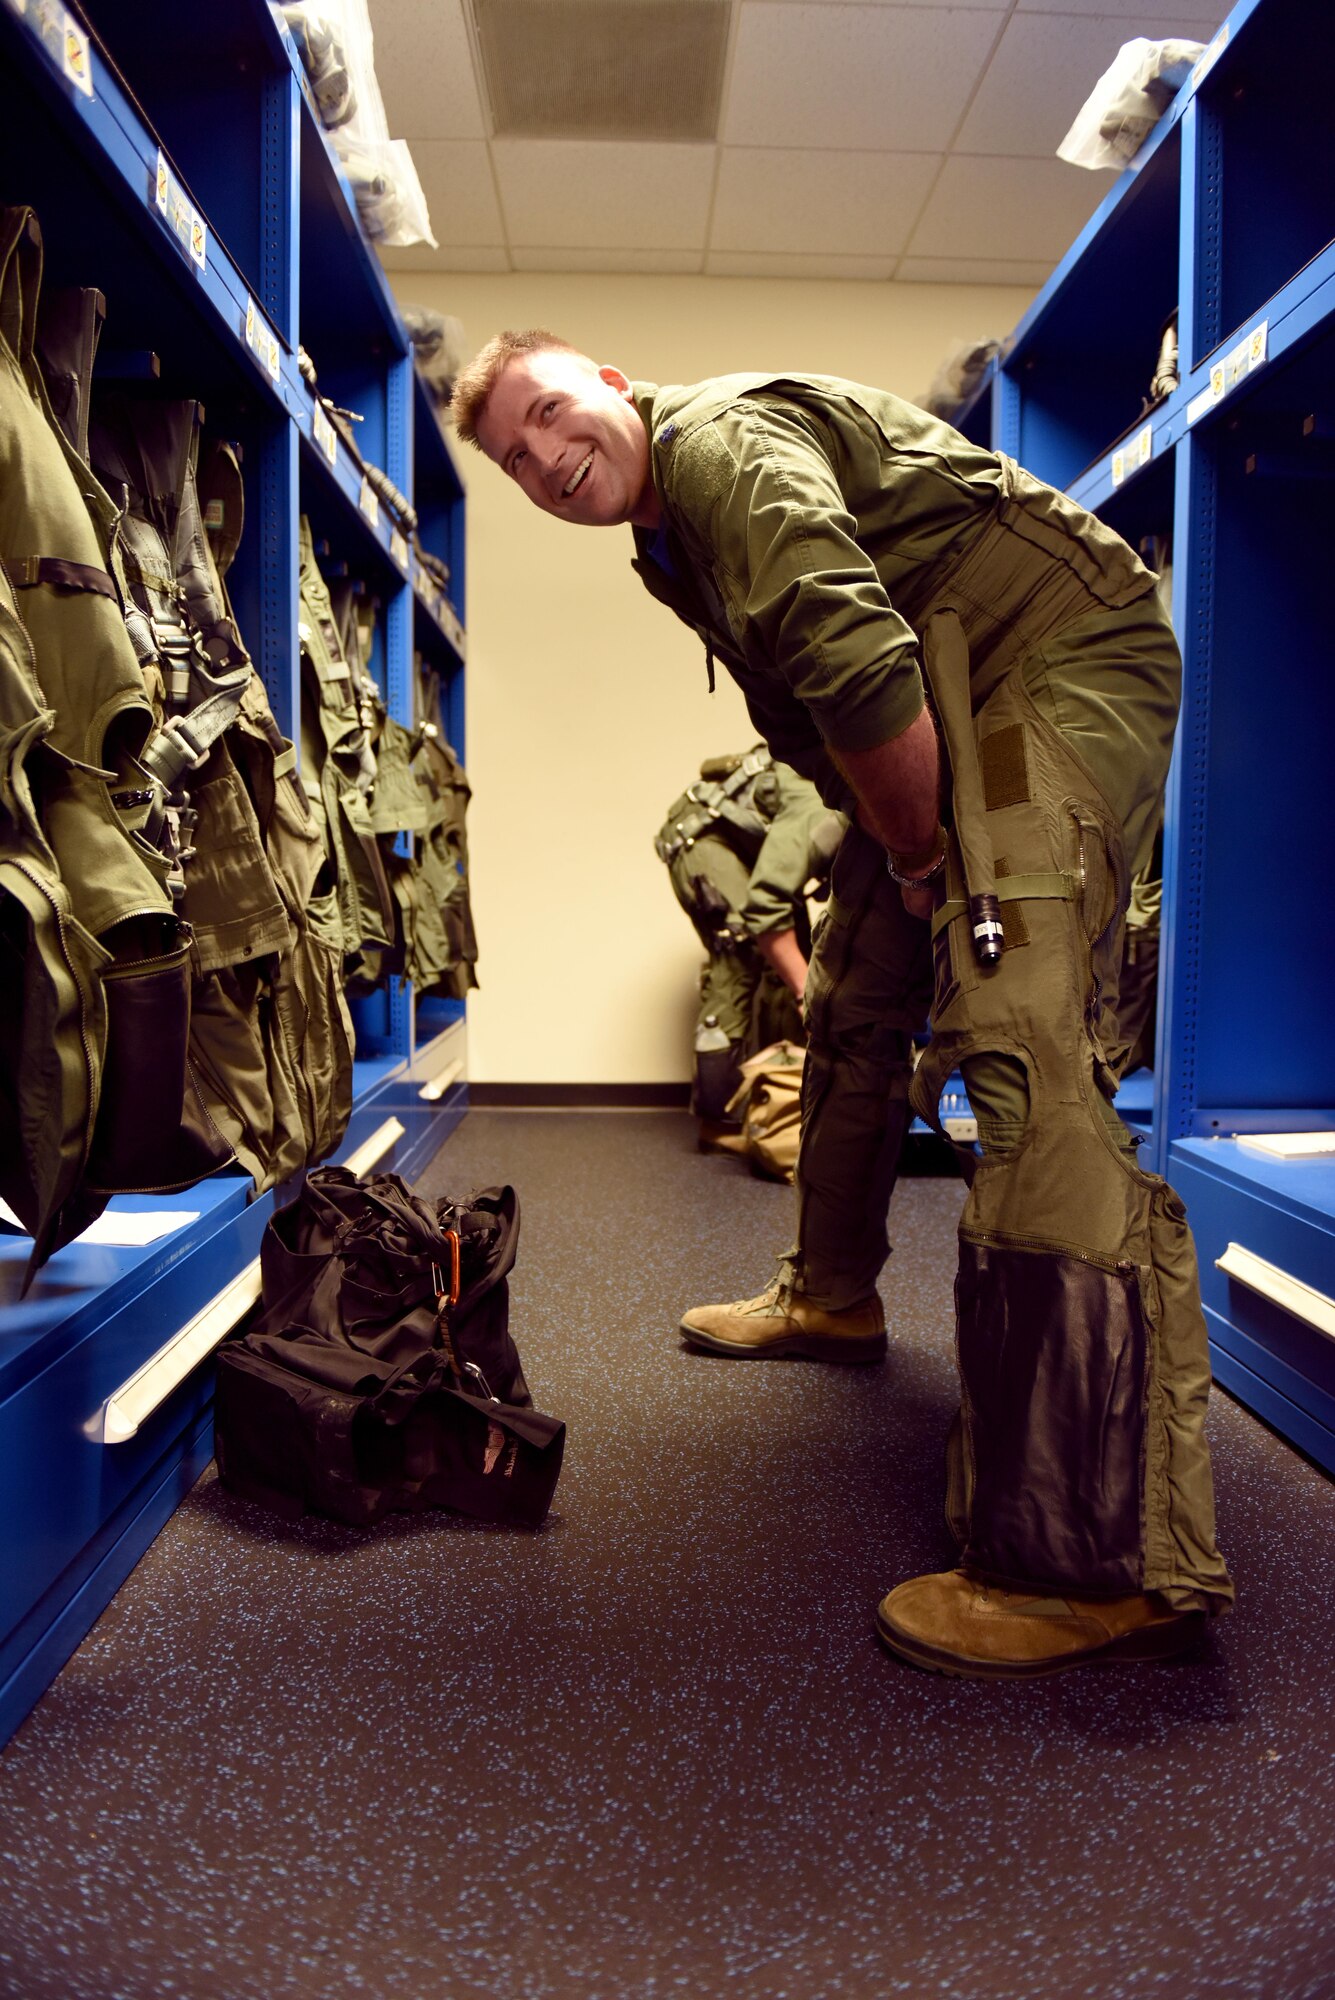 Lt. Col. Eric Schmidt, 334th Fighter Squadron director of operations, suits up prior to his final flight in an F-15E Strike Eagle June 17, 2016, at Seymour Johnson Air Force Base, North Carolina. Schmidt, a Strike Eagle pilot, eclipsed 3,000 hours in the aircraft on his final flight. (U.S. Air Force photo/Tech. Sgt. Chuck Broadway)